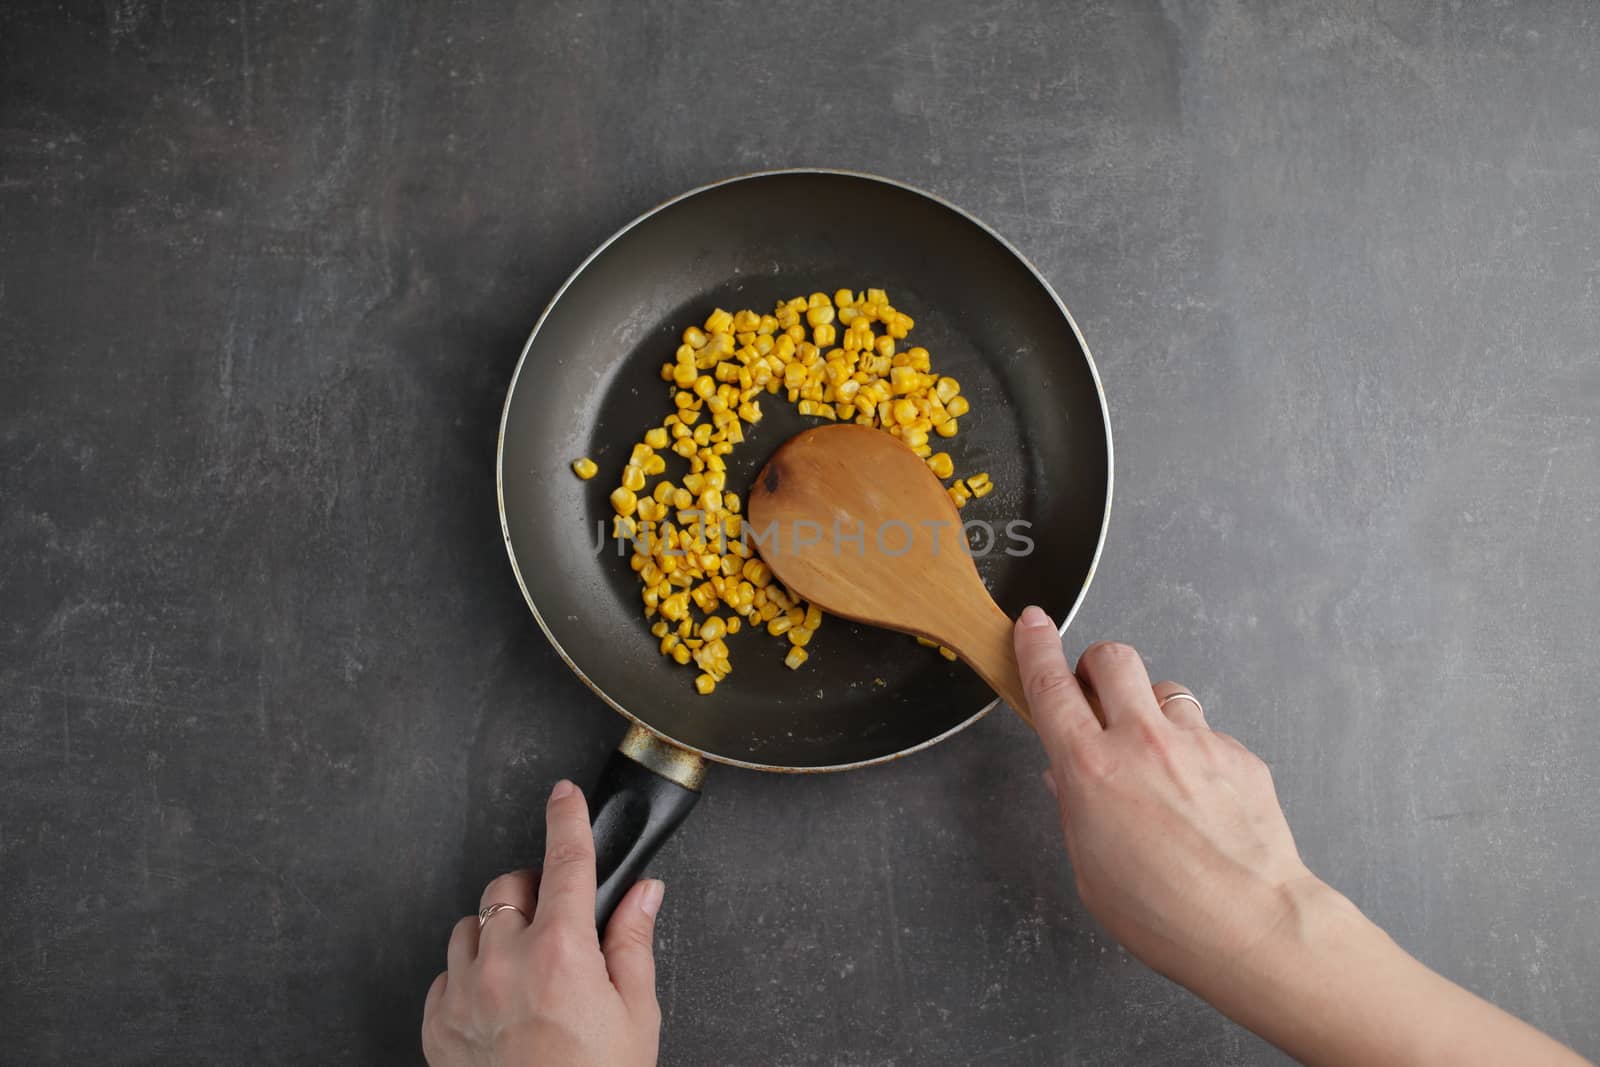 Diet. Organic Grilled Corn in a frying pan. Organic farm vegetables. Gray background Top view. Wooden spoon in hand. Environmentally friendly products